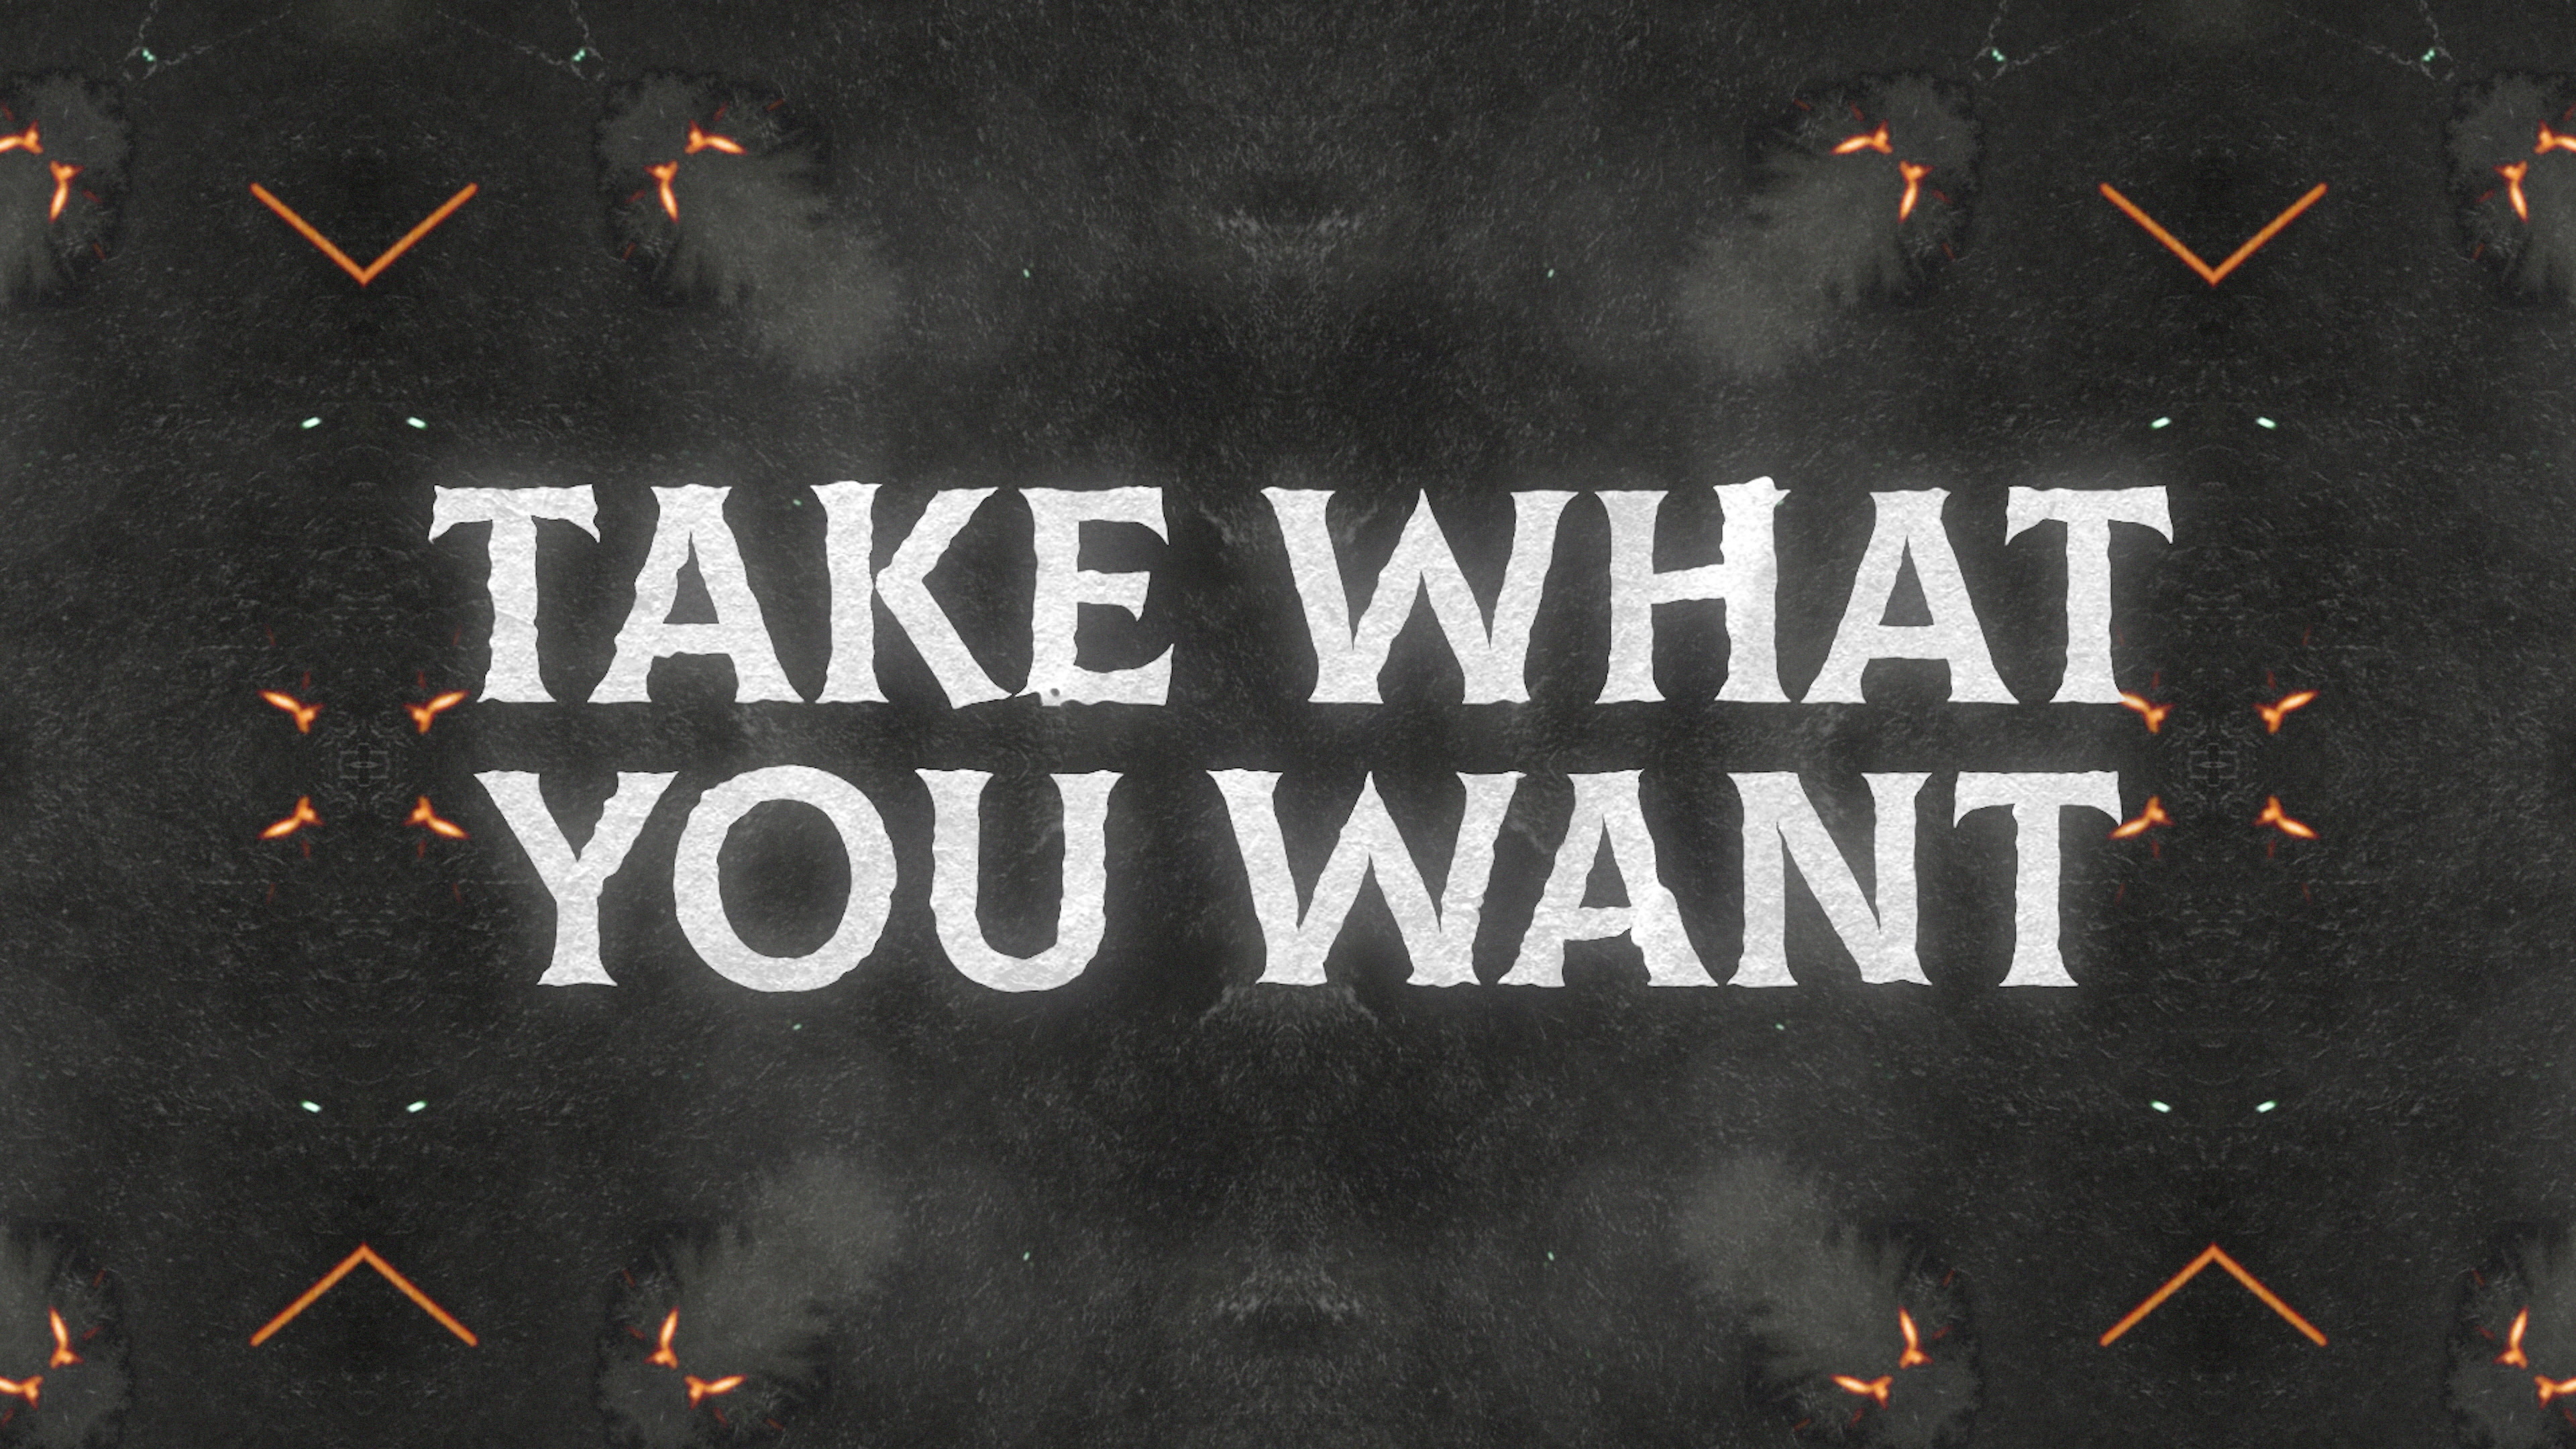 Take What You Want